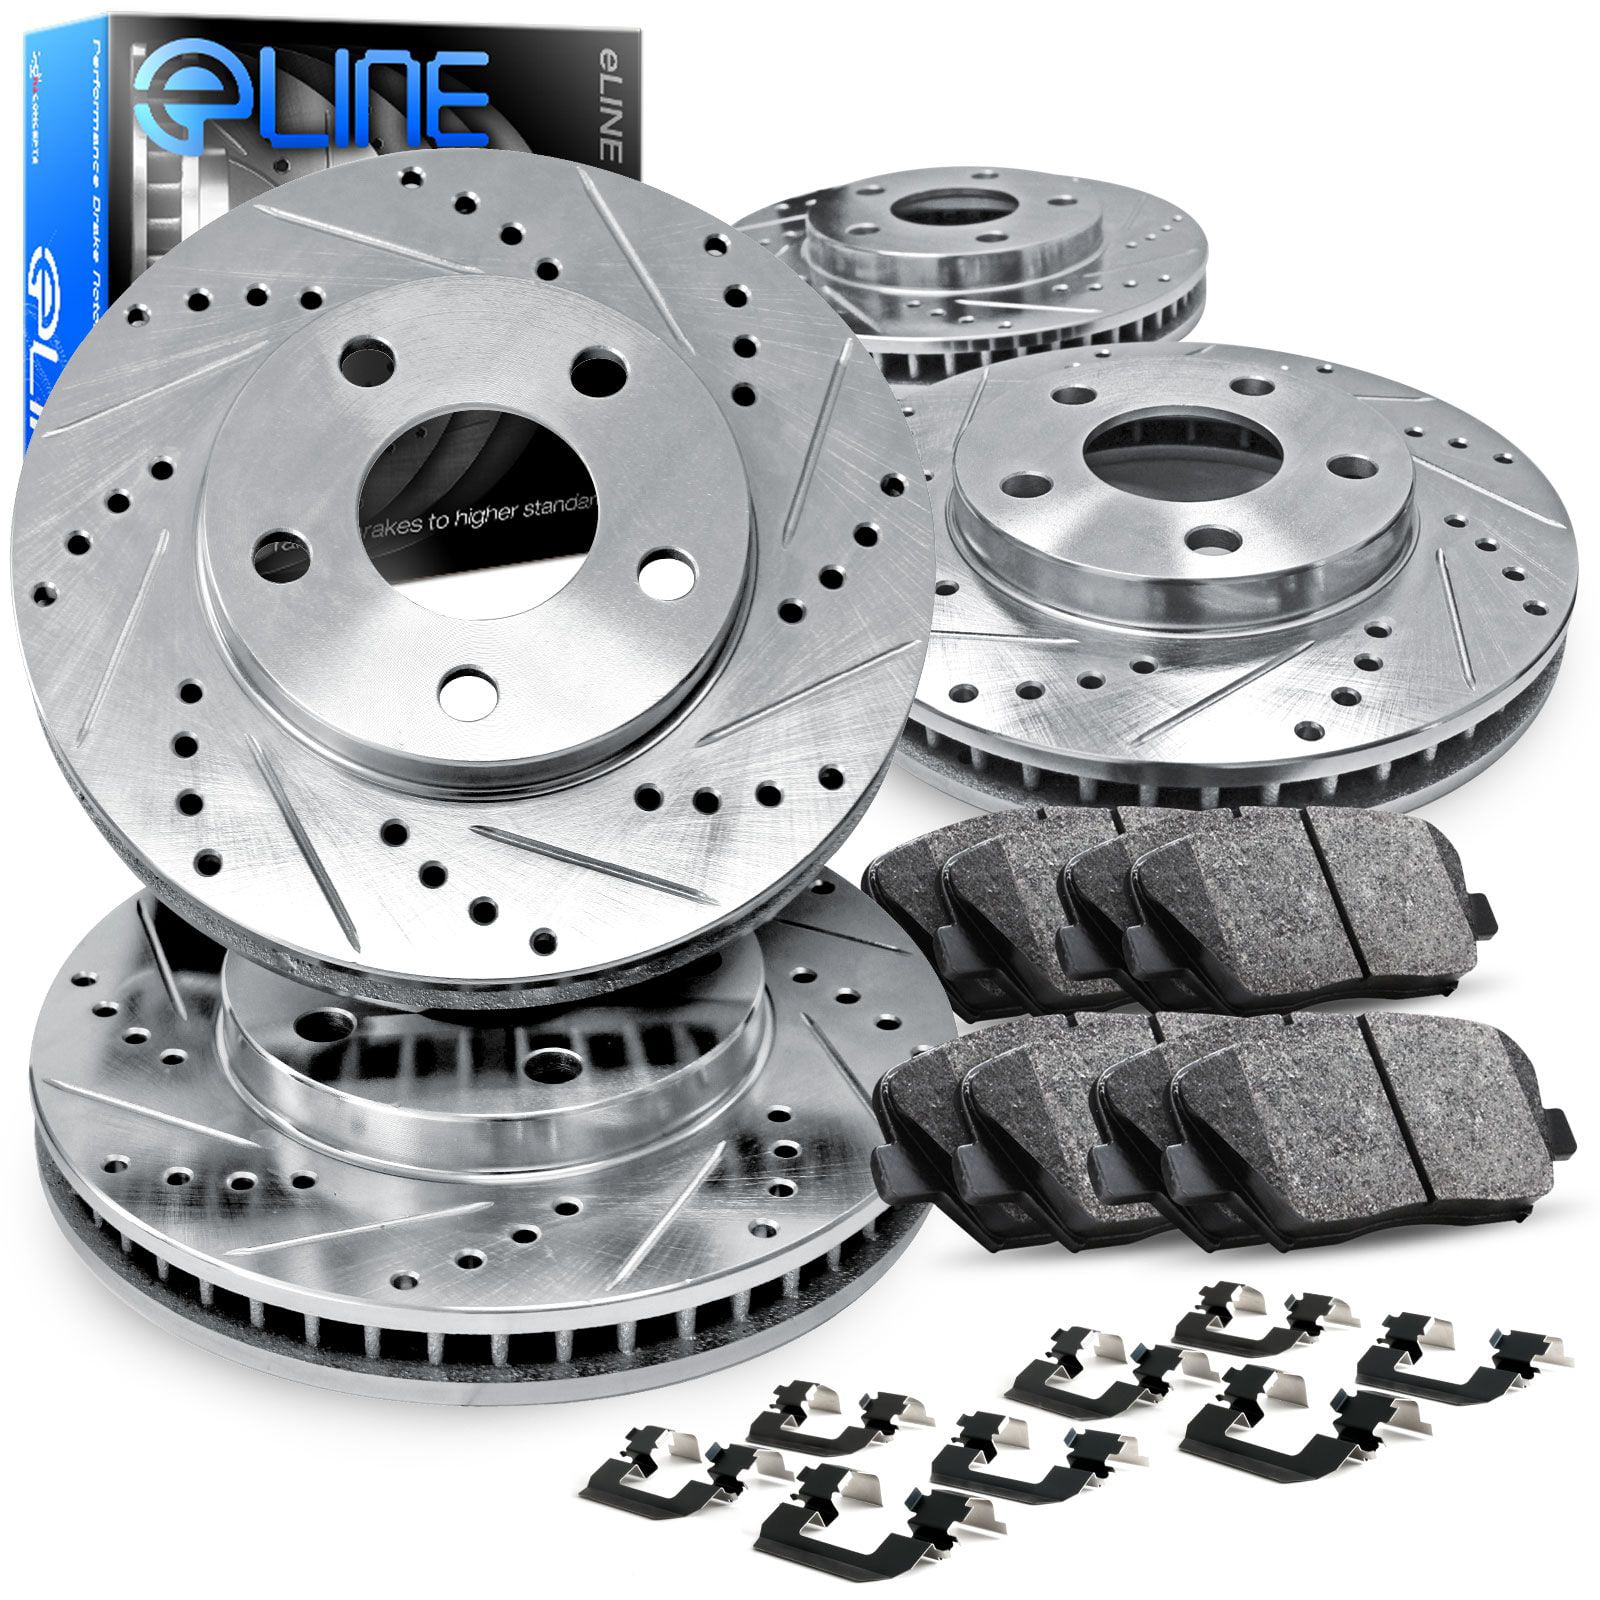 Front Performance Drilled Slotted Brake Rotors & Ceramic Pads Kit for BMW 528i